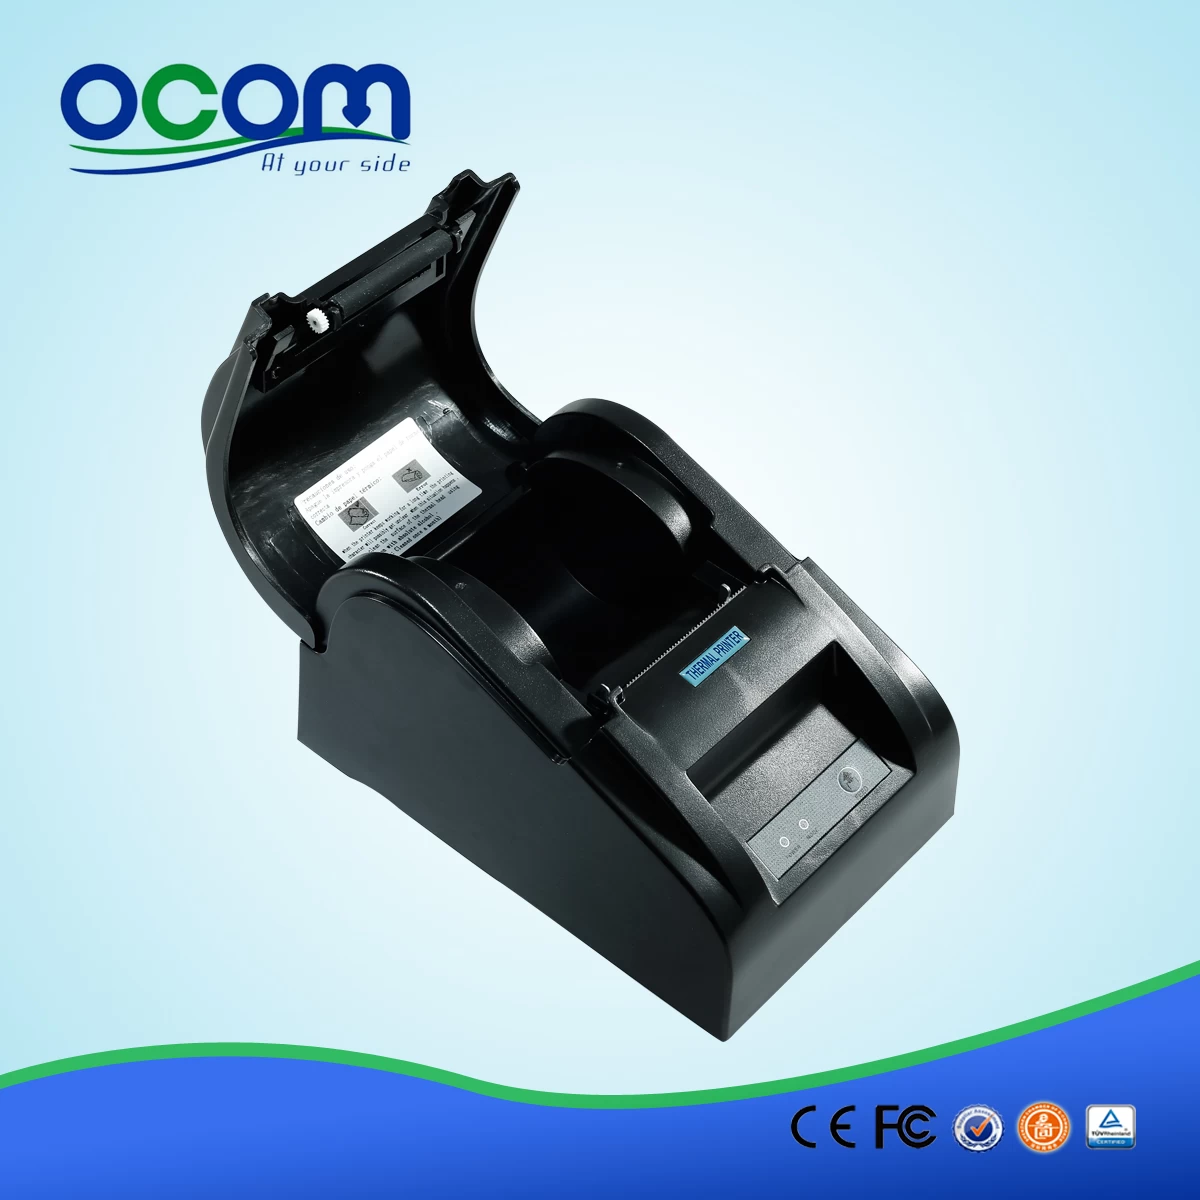 Factory Directly 58mm POS Thermal Printer. Receipt Printer